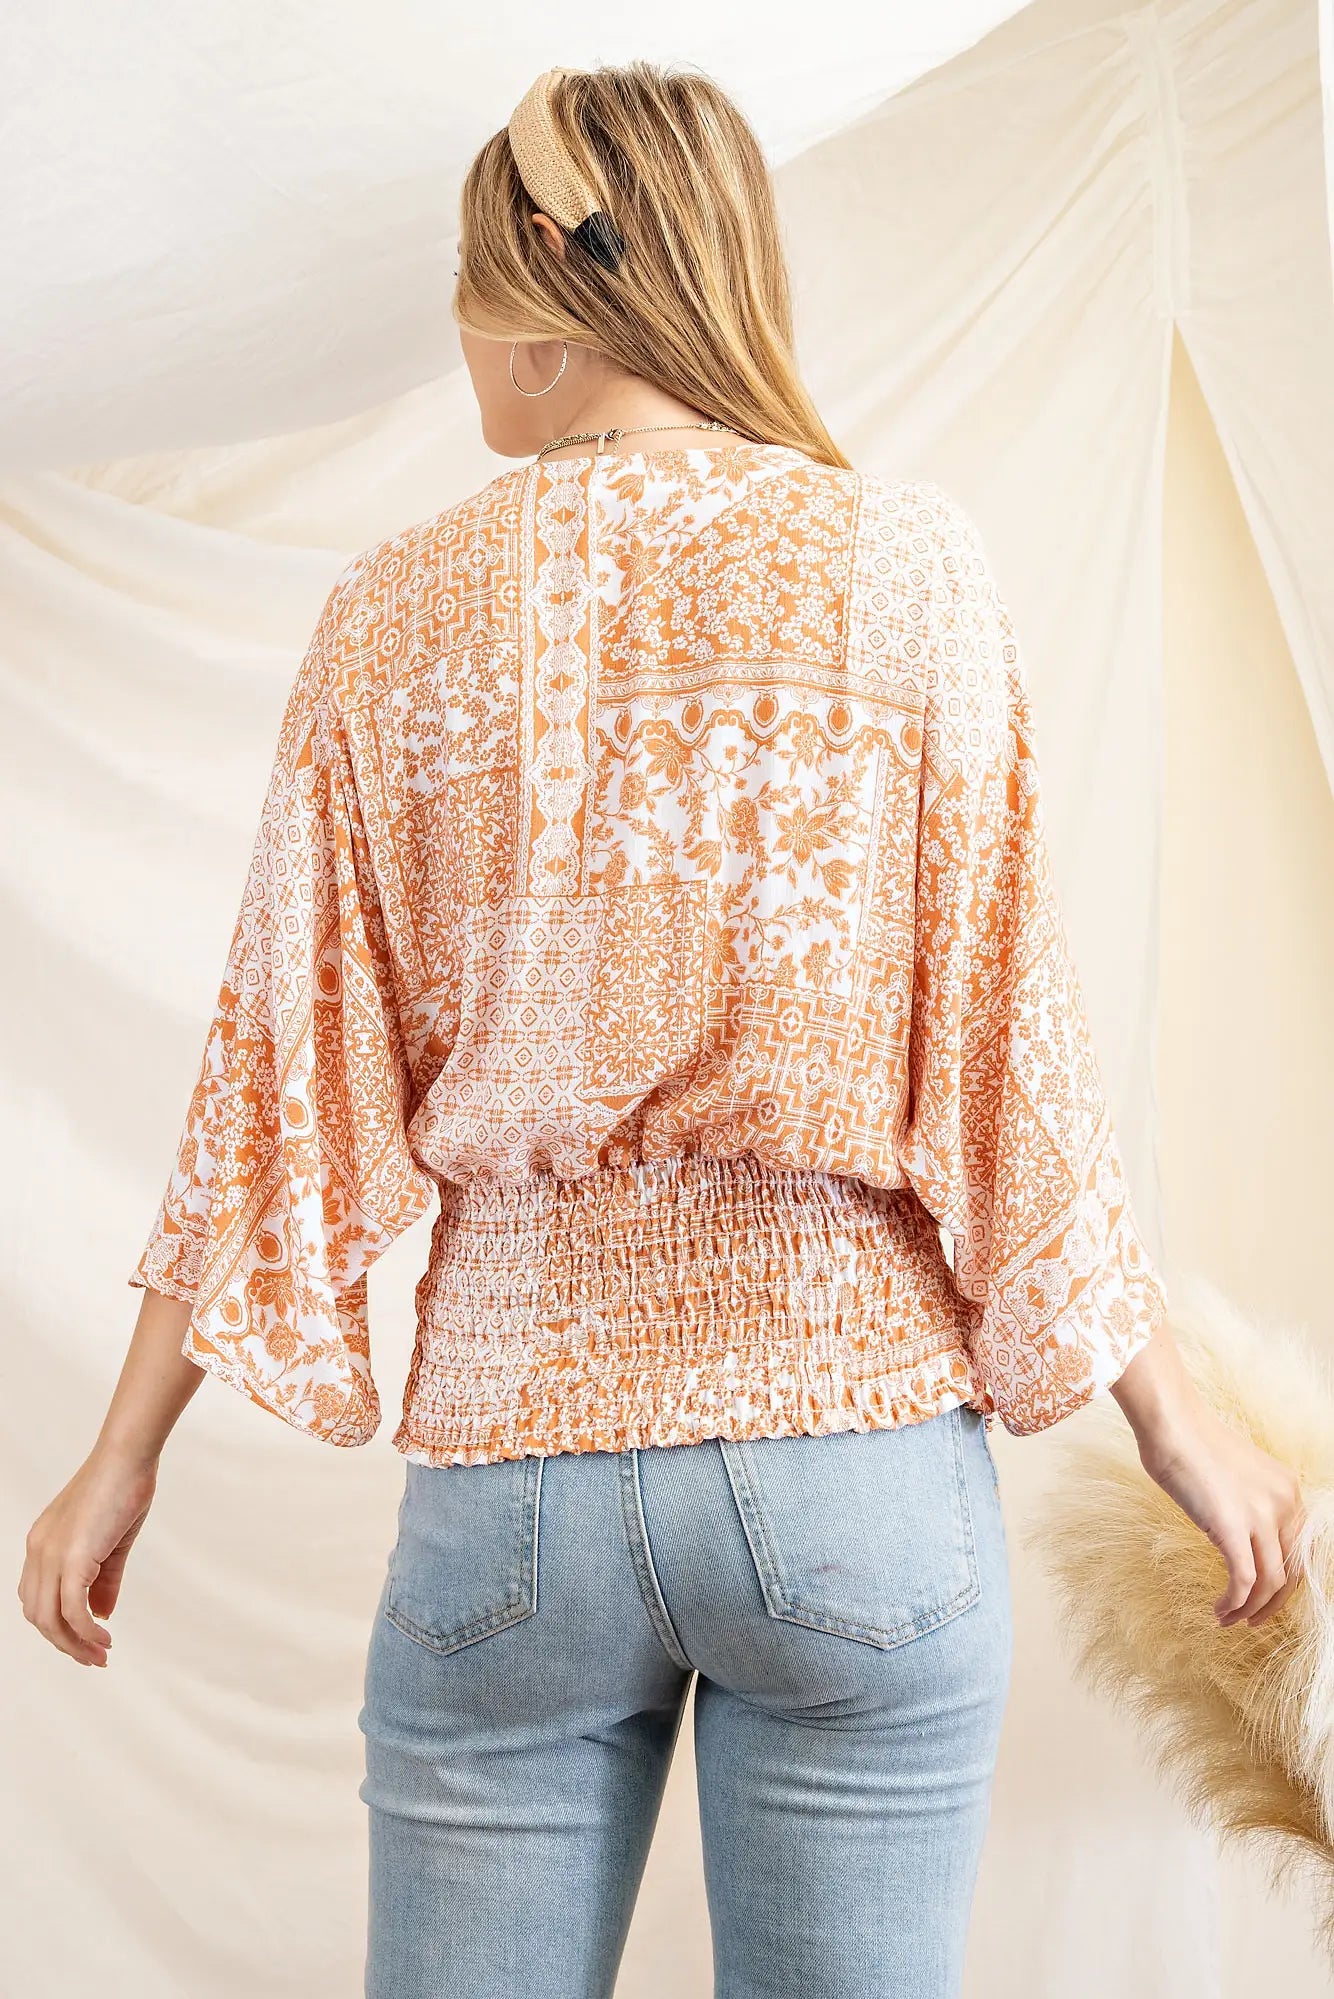 This cute plus size patchwork print blouse will have your turning heads in San Luis Obispo. It features a surpliced front with smocking waistband with 3/4 kimono sleeves. The top is woven.